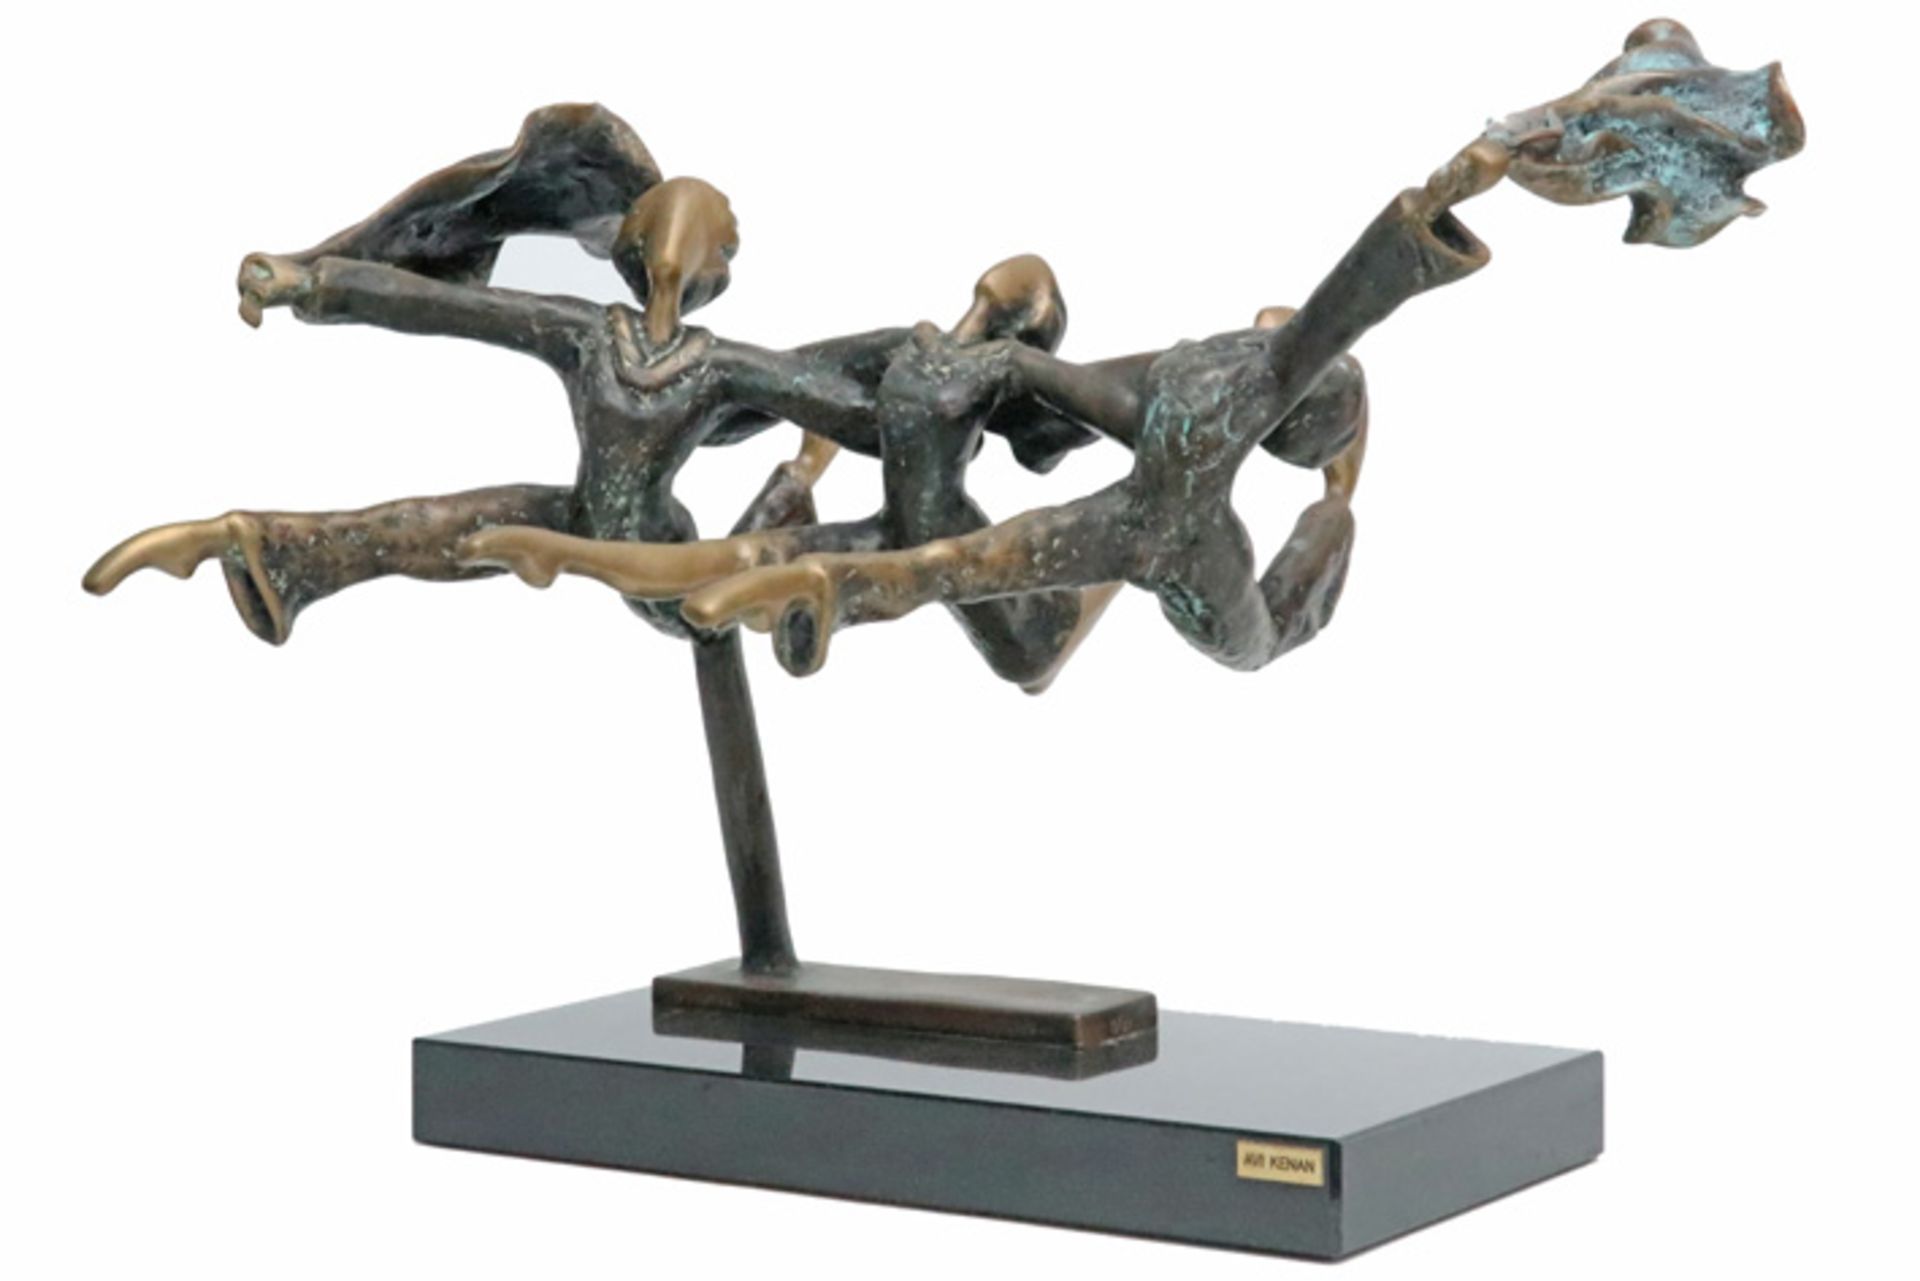 20th Cent. Avi Kenan sculpture in bronze titled "Flying Dancers" - signed and dated 1980 || AVI - Image 2 of 7